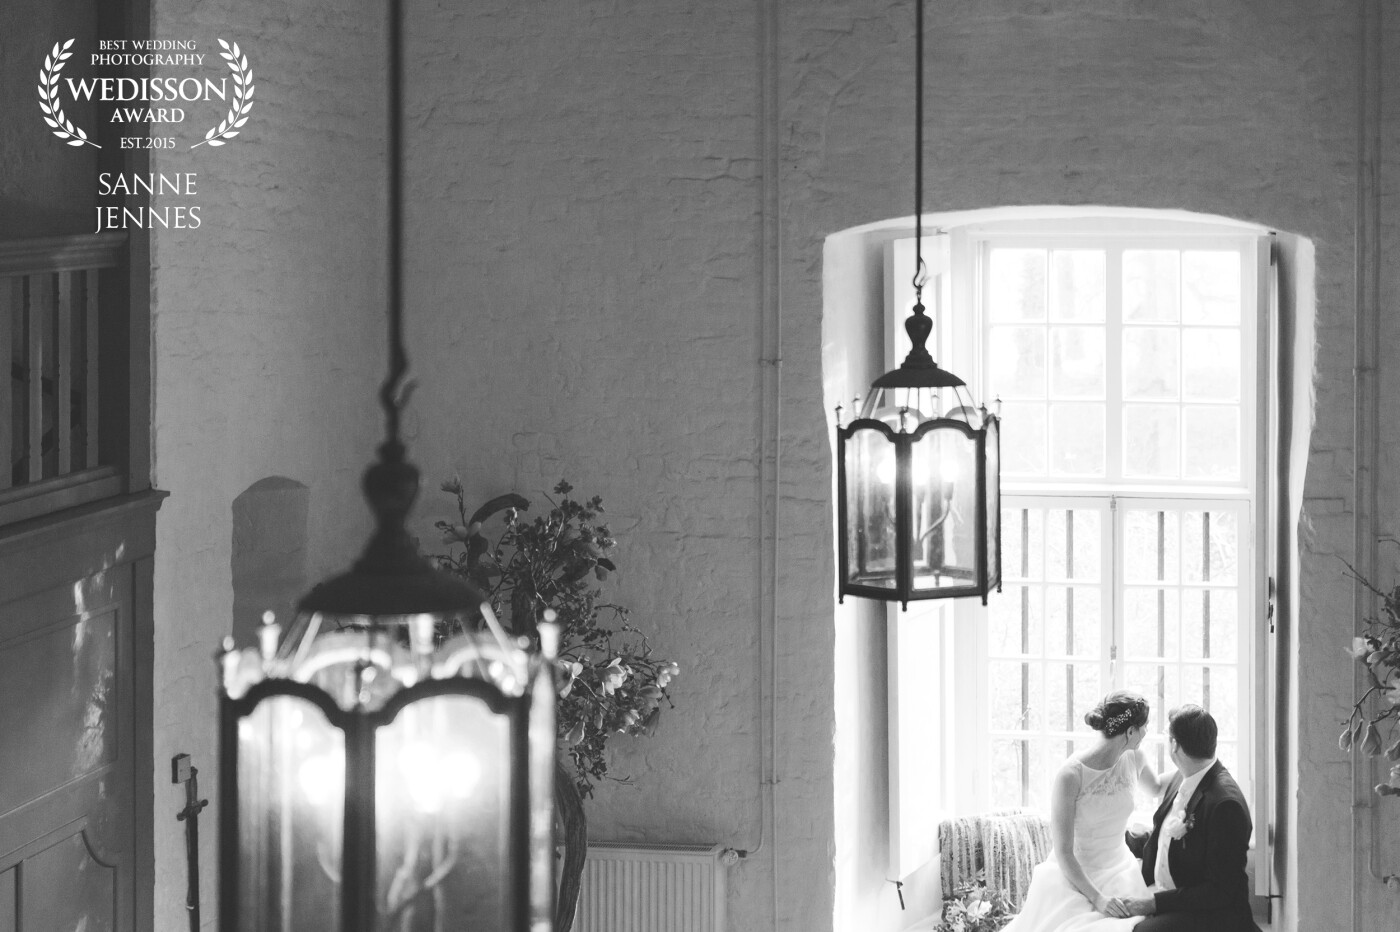 This December was my first Winter Wedding which took place at the most beautiful little castle in Ewijk, The Netherlands (Slot Doddendael). I met the couple one month before their wedding at the wedding location were we went through the details of their day. During this conversation we were sitting in this beautiful room and i instanly saw some oppurtunities for their wedding shoot. The day of their wedding was very relaxed and we even had a beautiful winter sun present. The exact words of the couple were: Lets get married in December so we don't have to worry about the weather.. they got the most beautiful winter day they could have hoped for! It was an amazing first winter wedding experience, loved it ! 